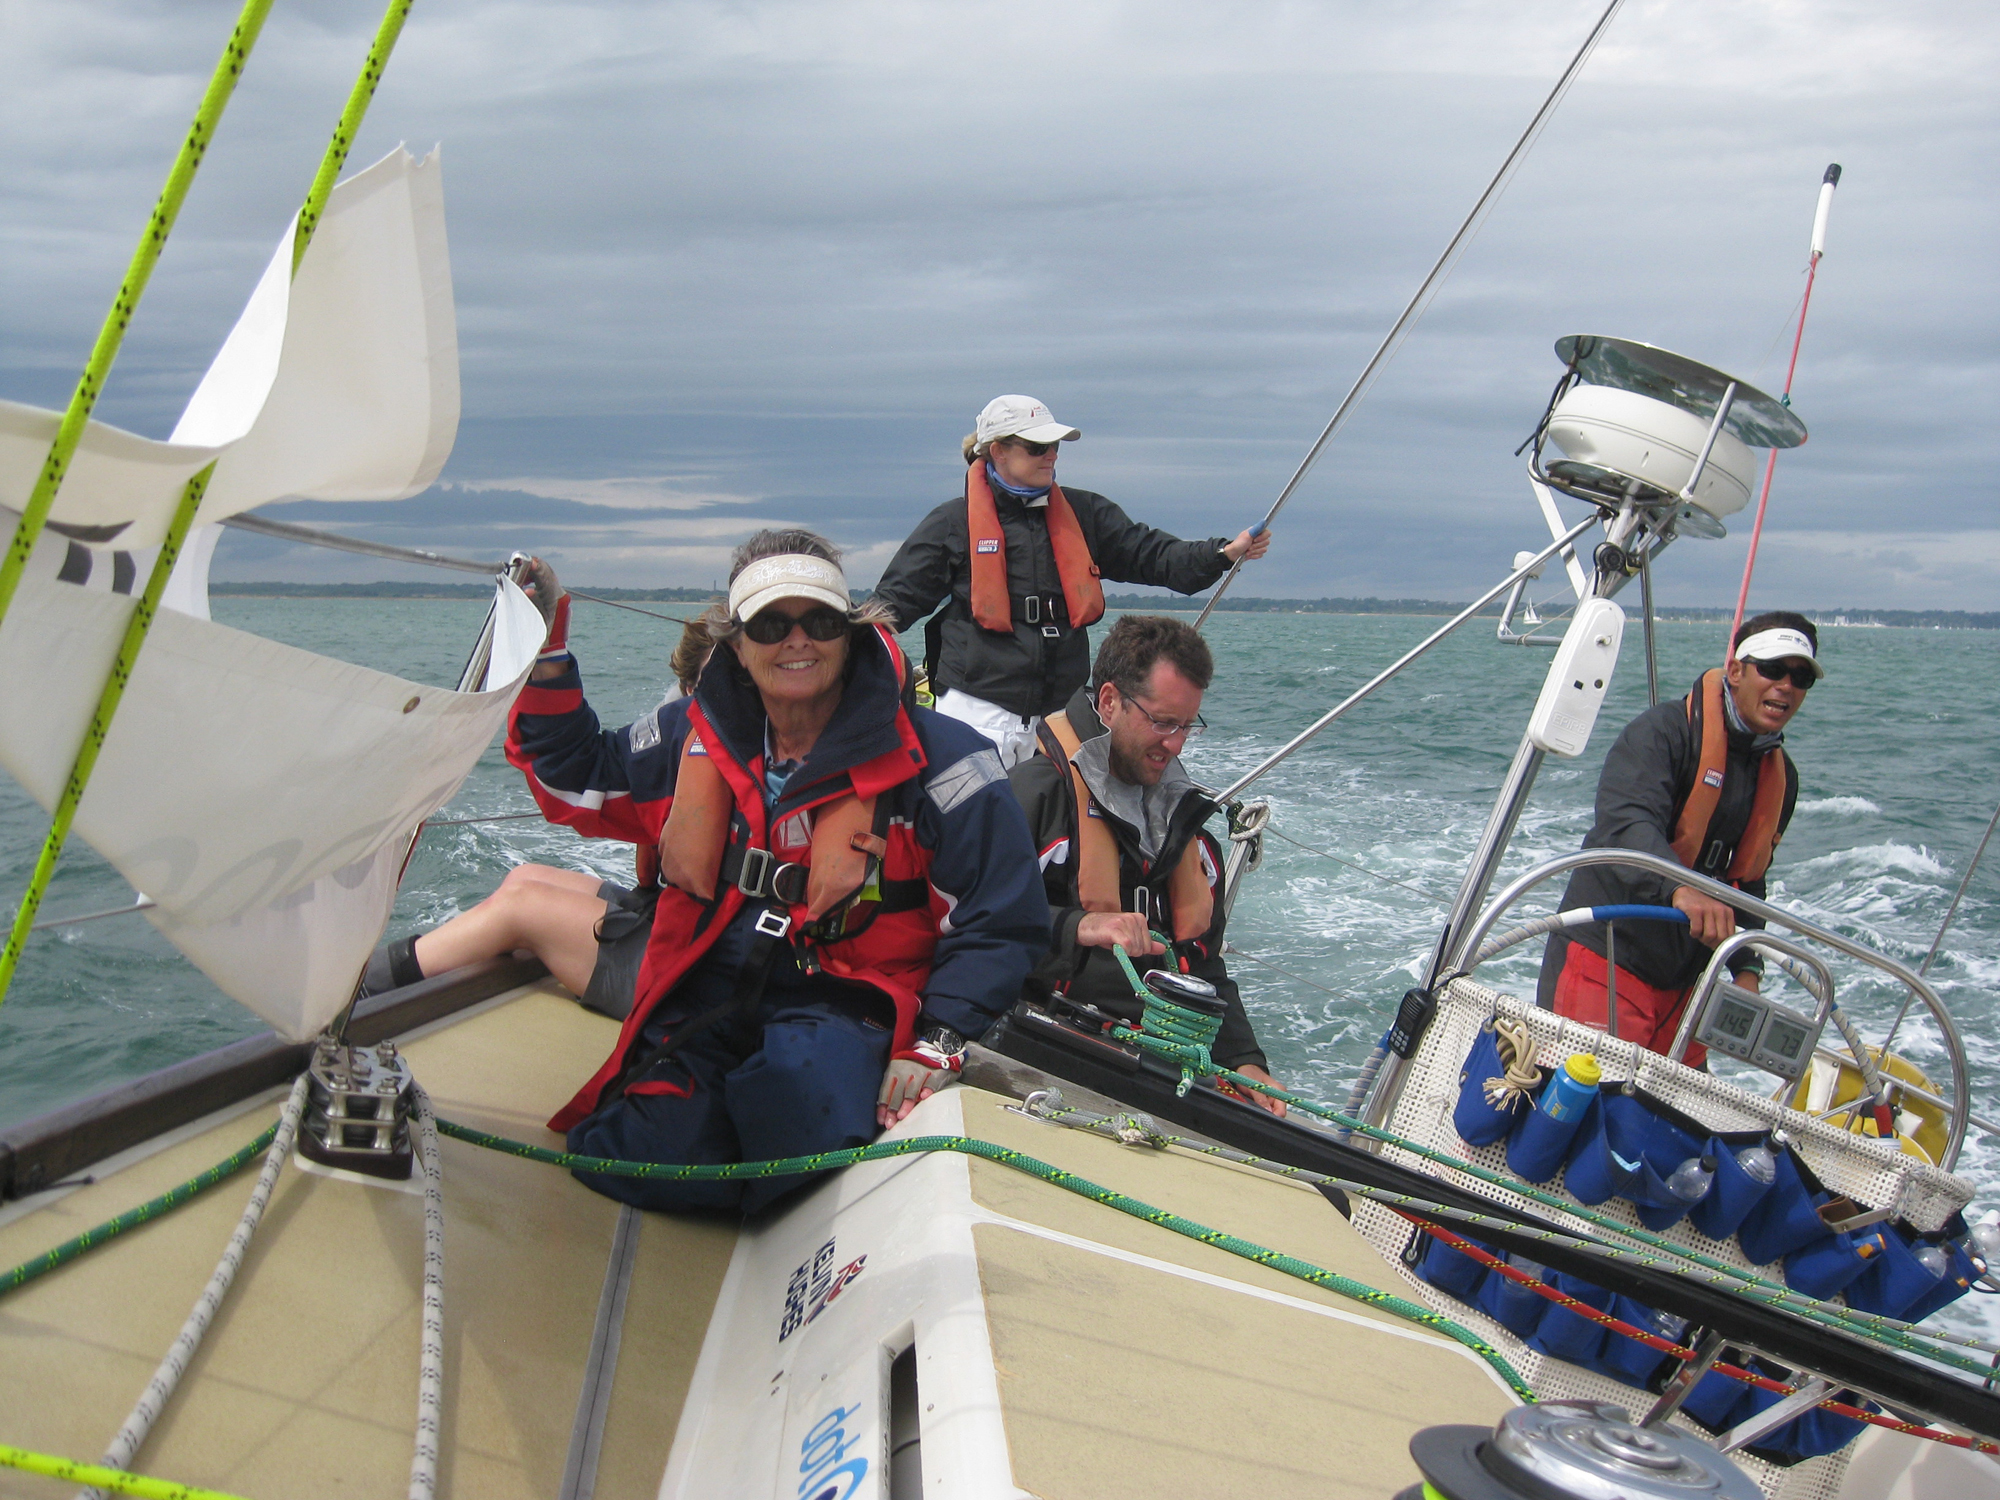  Susanna Hetherton during training for the Clipper 2015-16 Race